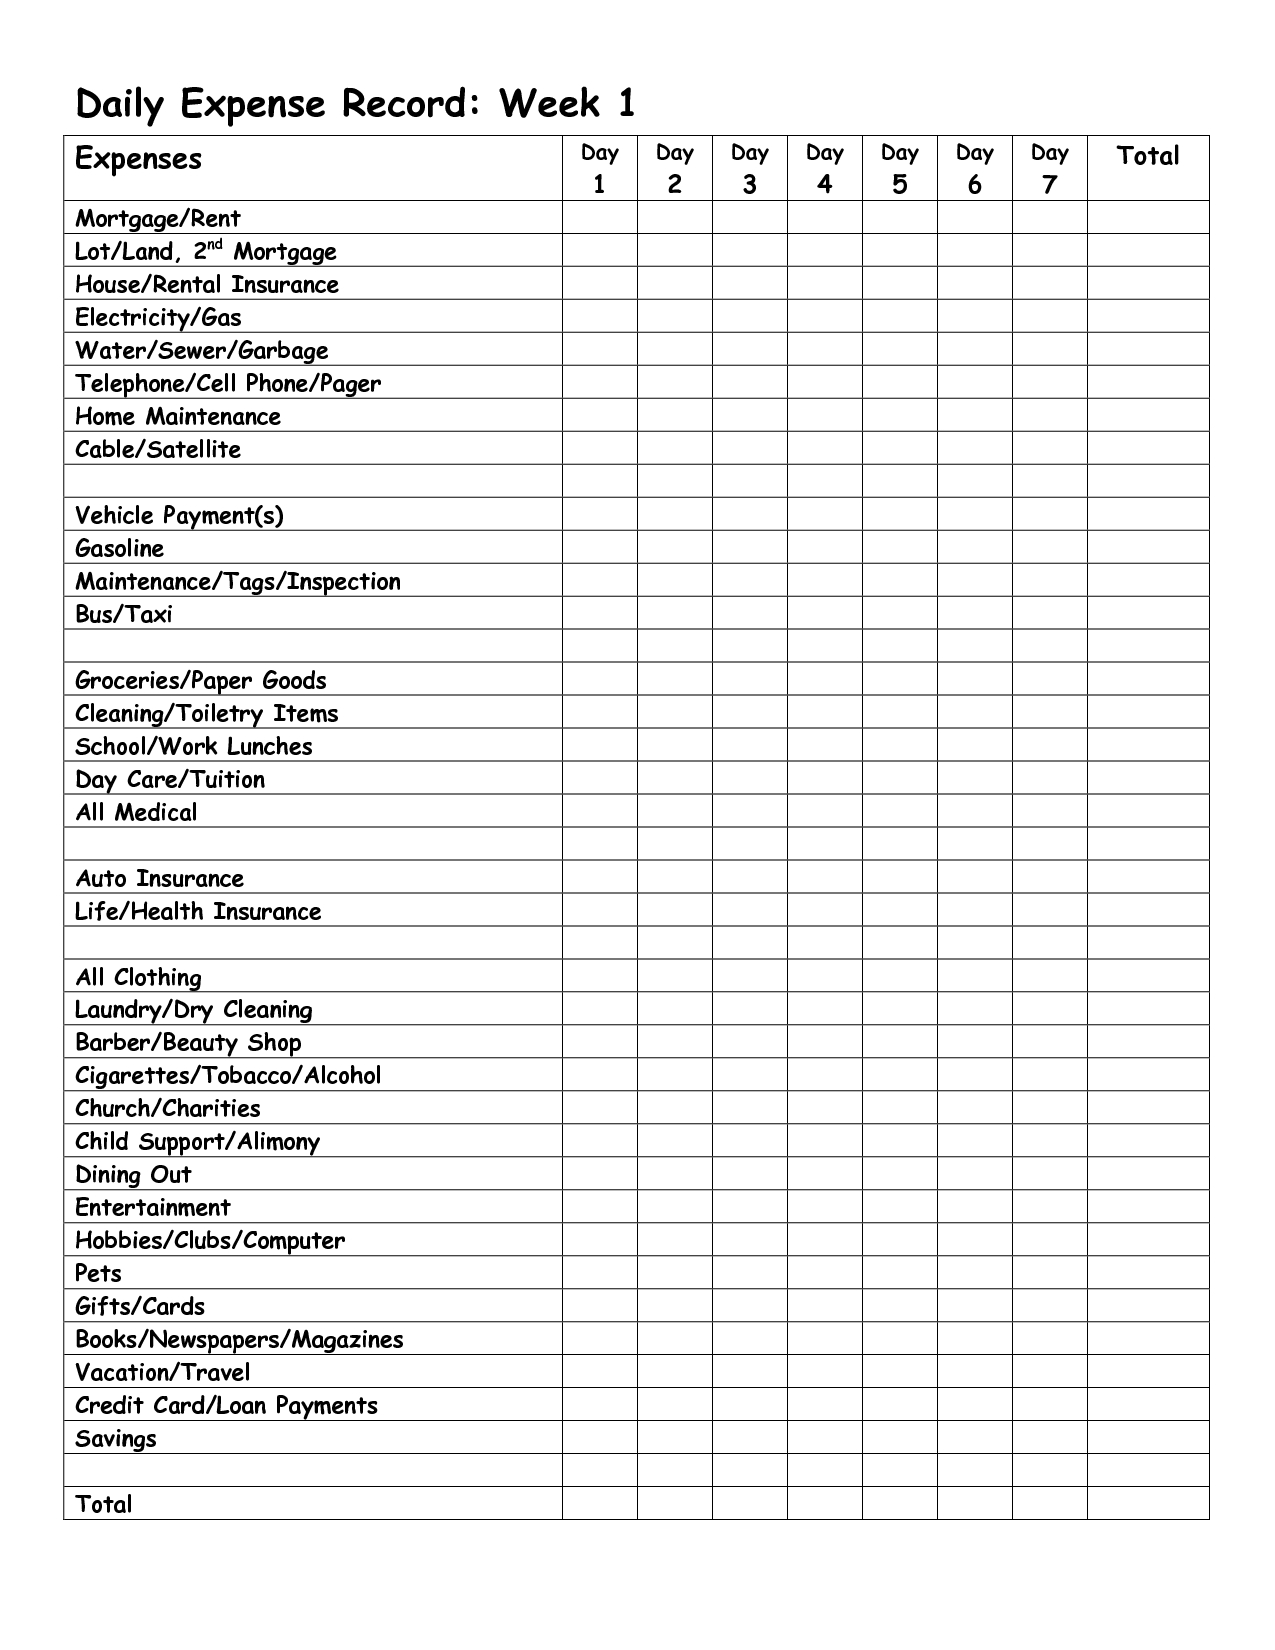 Monthly Expense Report Template | Daily Expense Record Week  Day Care Payment Spreadsheet